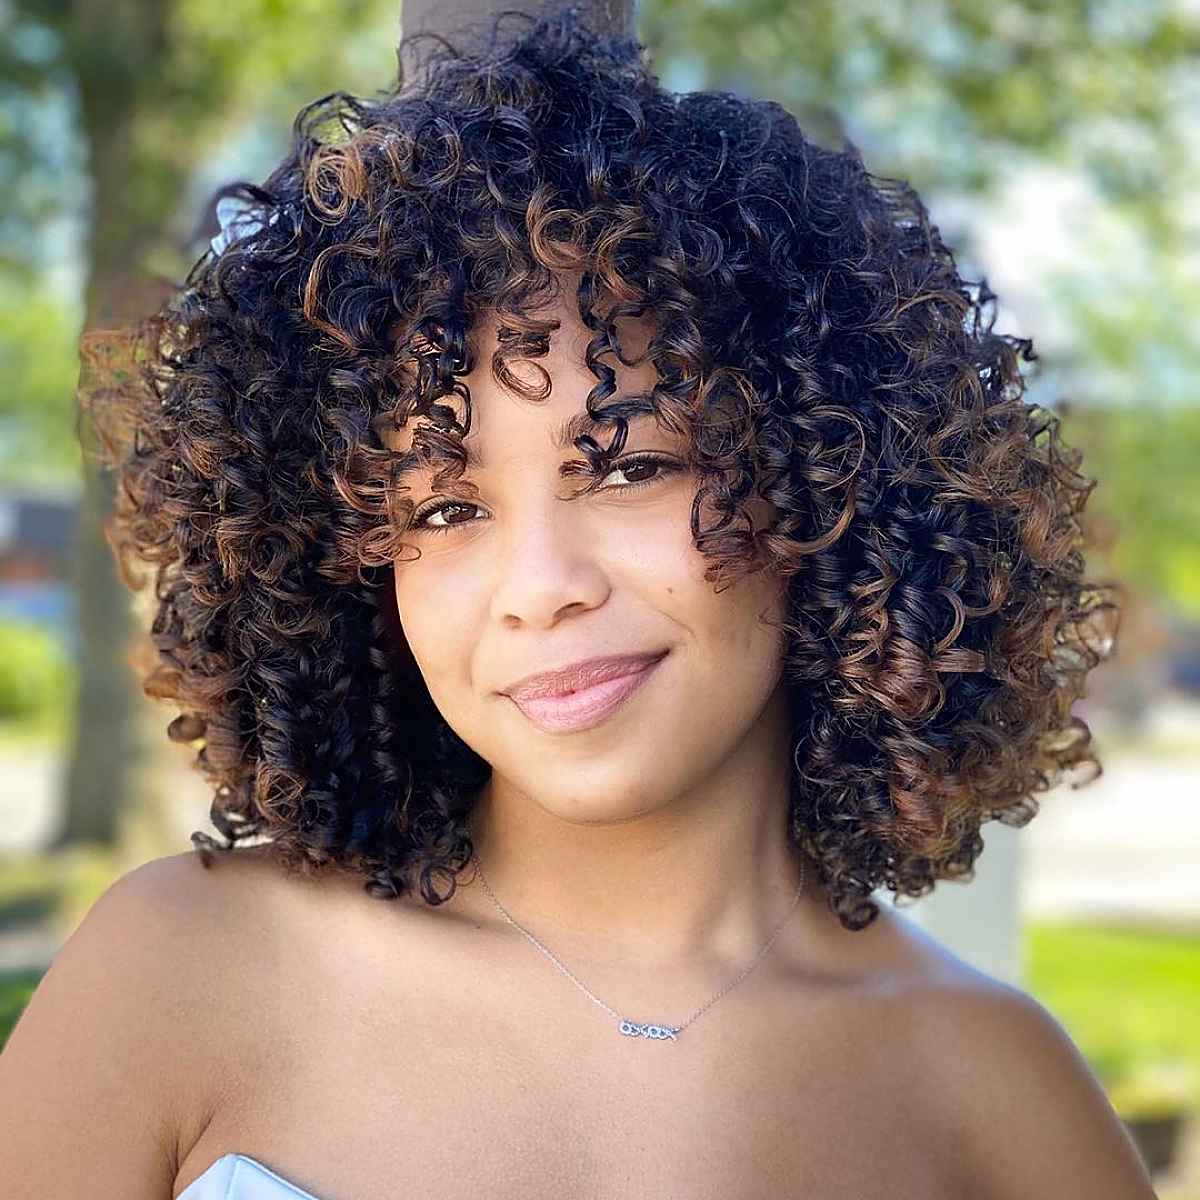 Amazing Curly Hair with Bangs